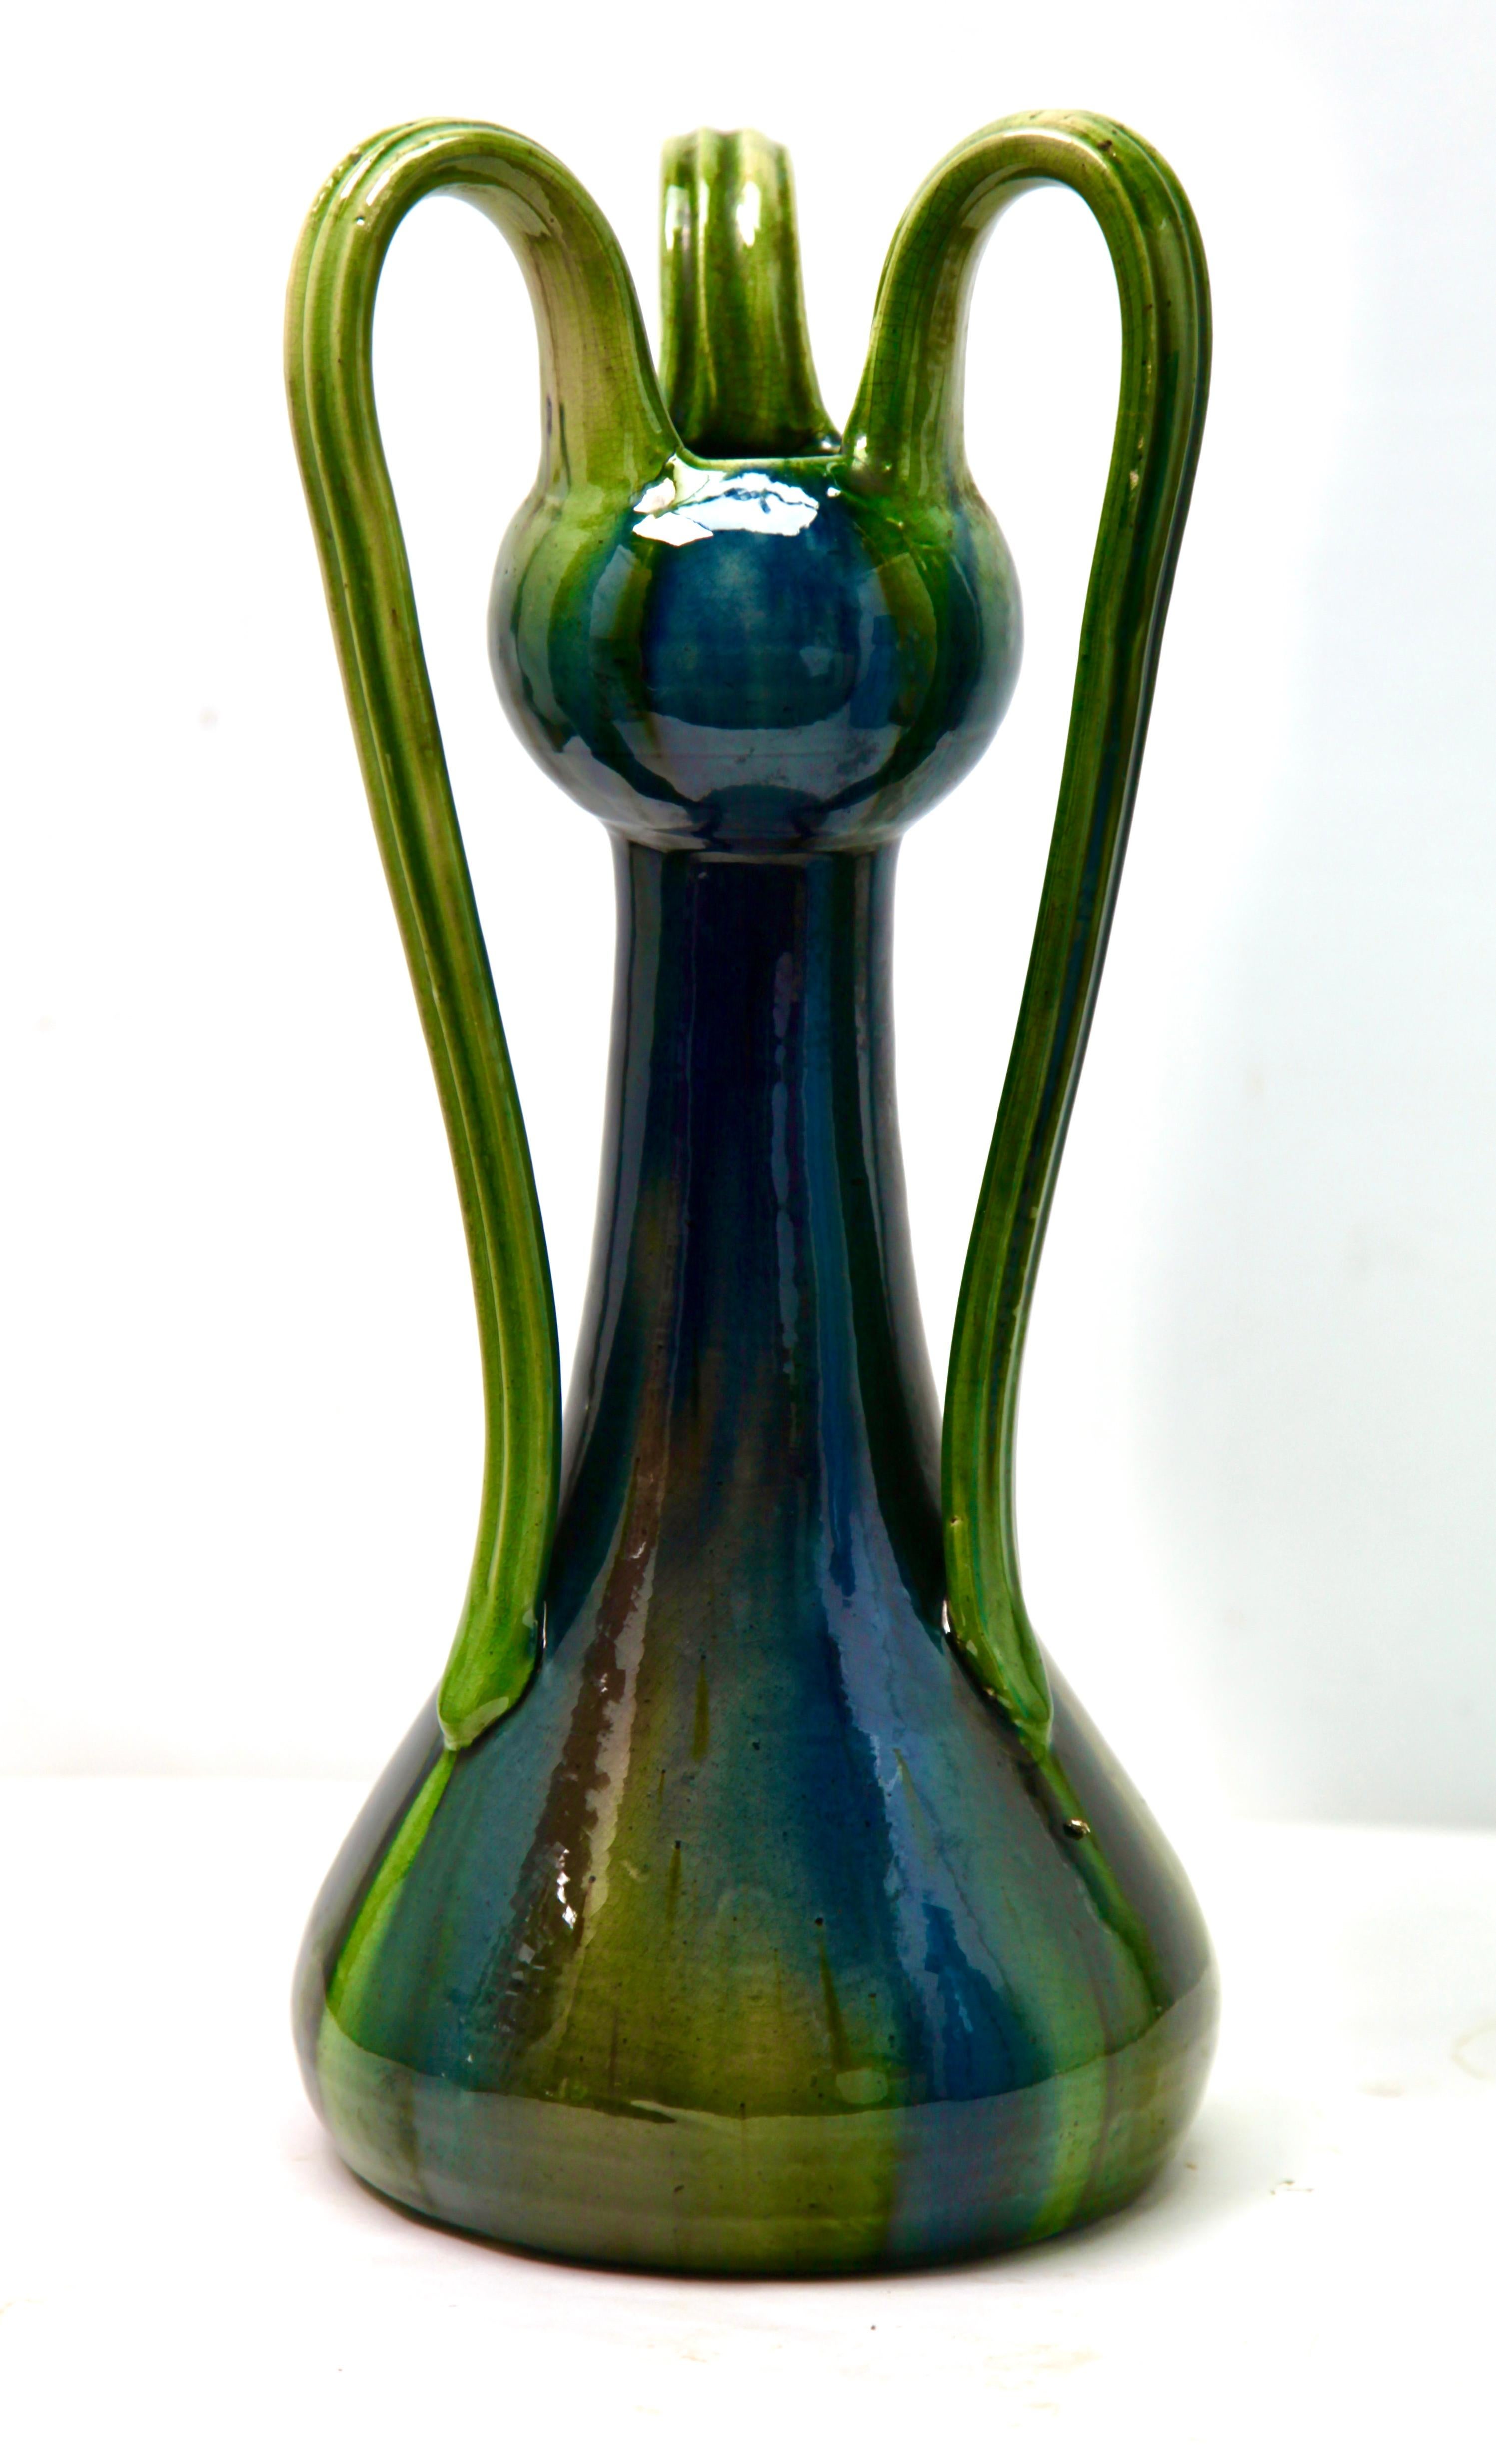 Belgian Art Nouveau Vase with 3 Handles with Controlled Drip Glazes in Blue and Green For Sale